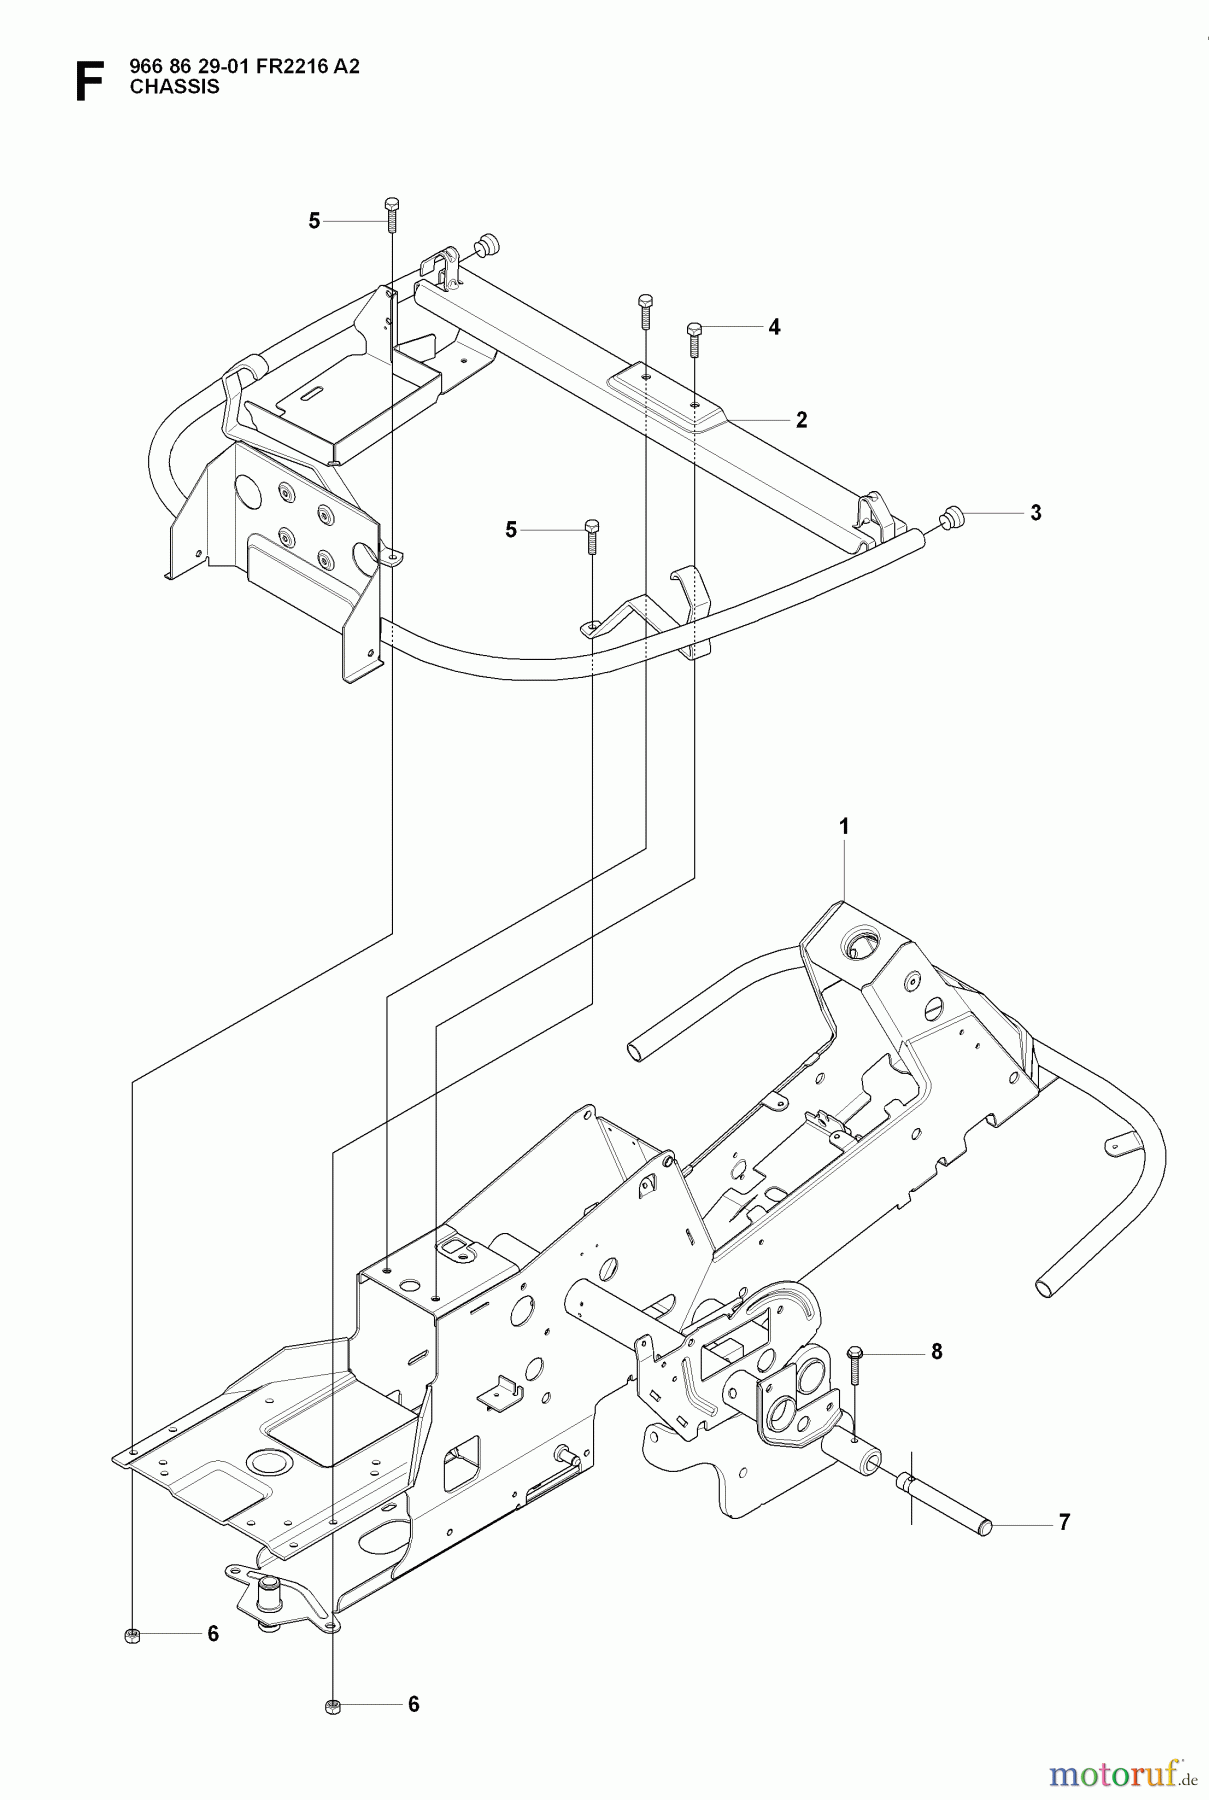  Jonsered Reitermäher FR2216 A2 (966862901) - Jonsered Rear-Engine Riding Mower (2008-01) CHASSIS ENCLOSURES